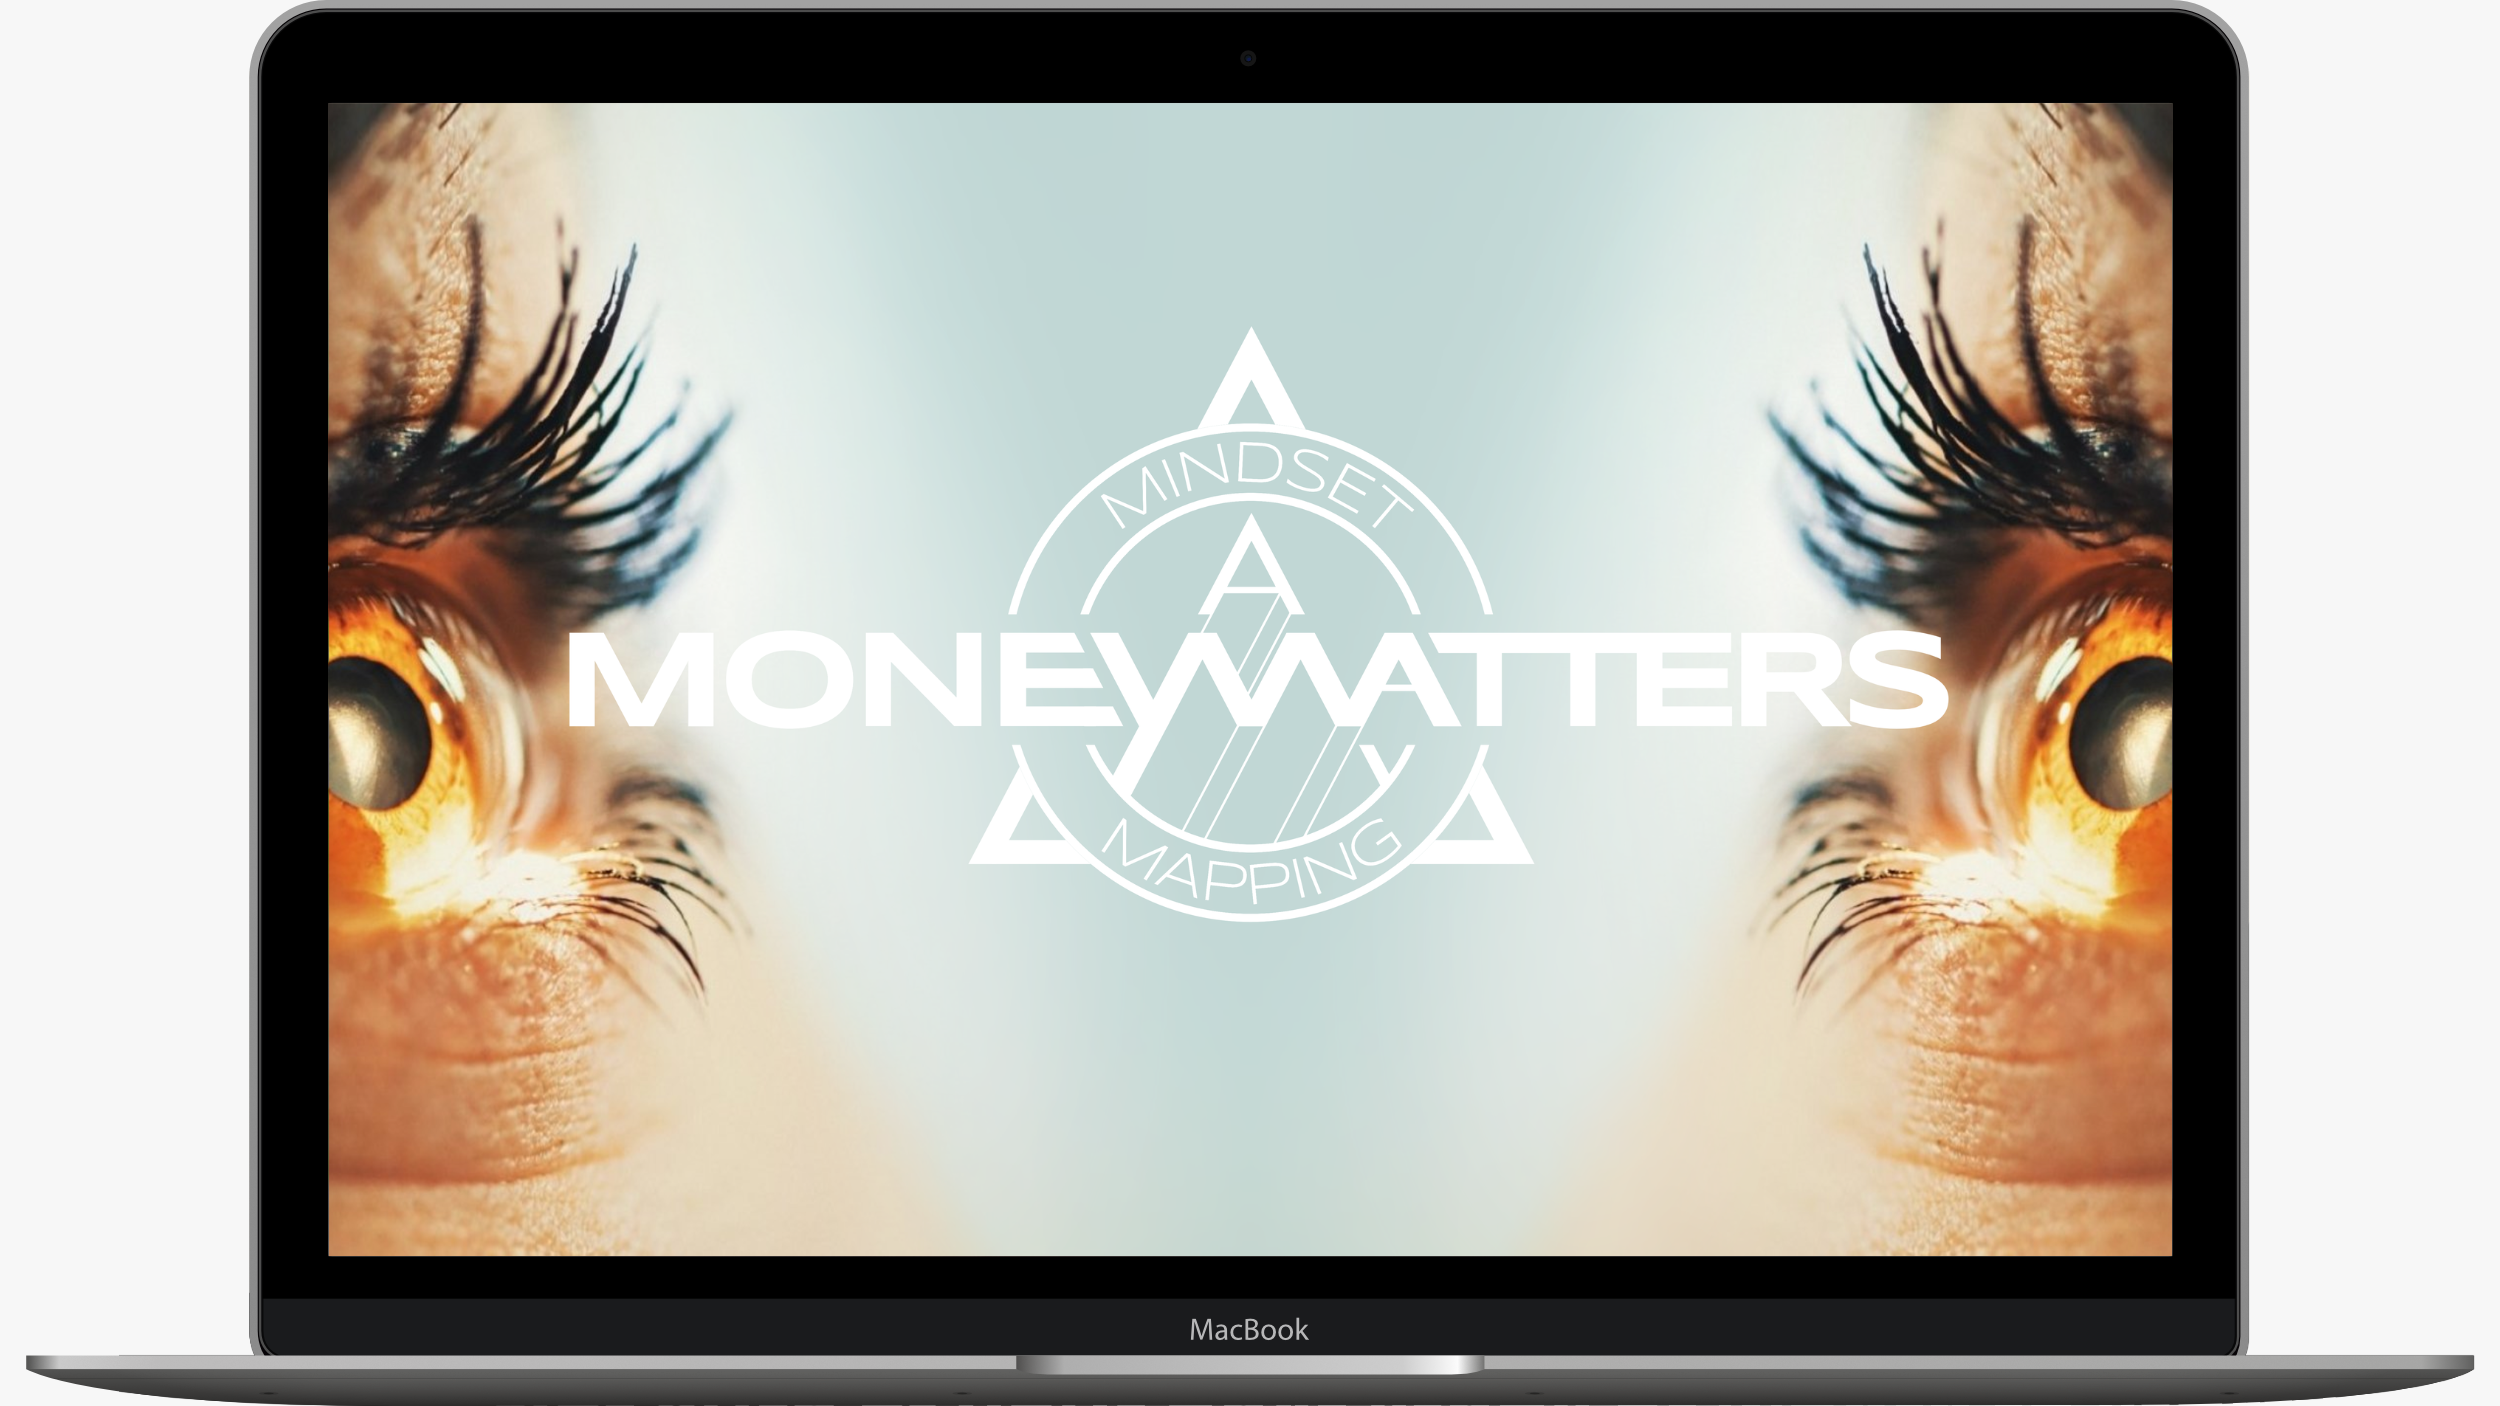 FLO Laptop - Front Facing - PROMO Images - 0001 - MONEY MATTERS Course Logo + Two Eyes Vision-Led - 2500px.png